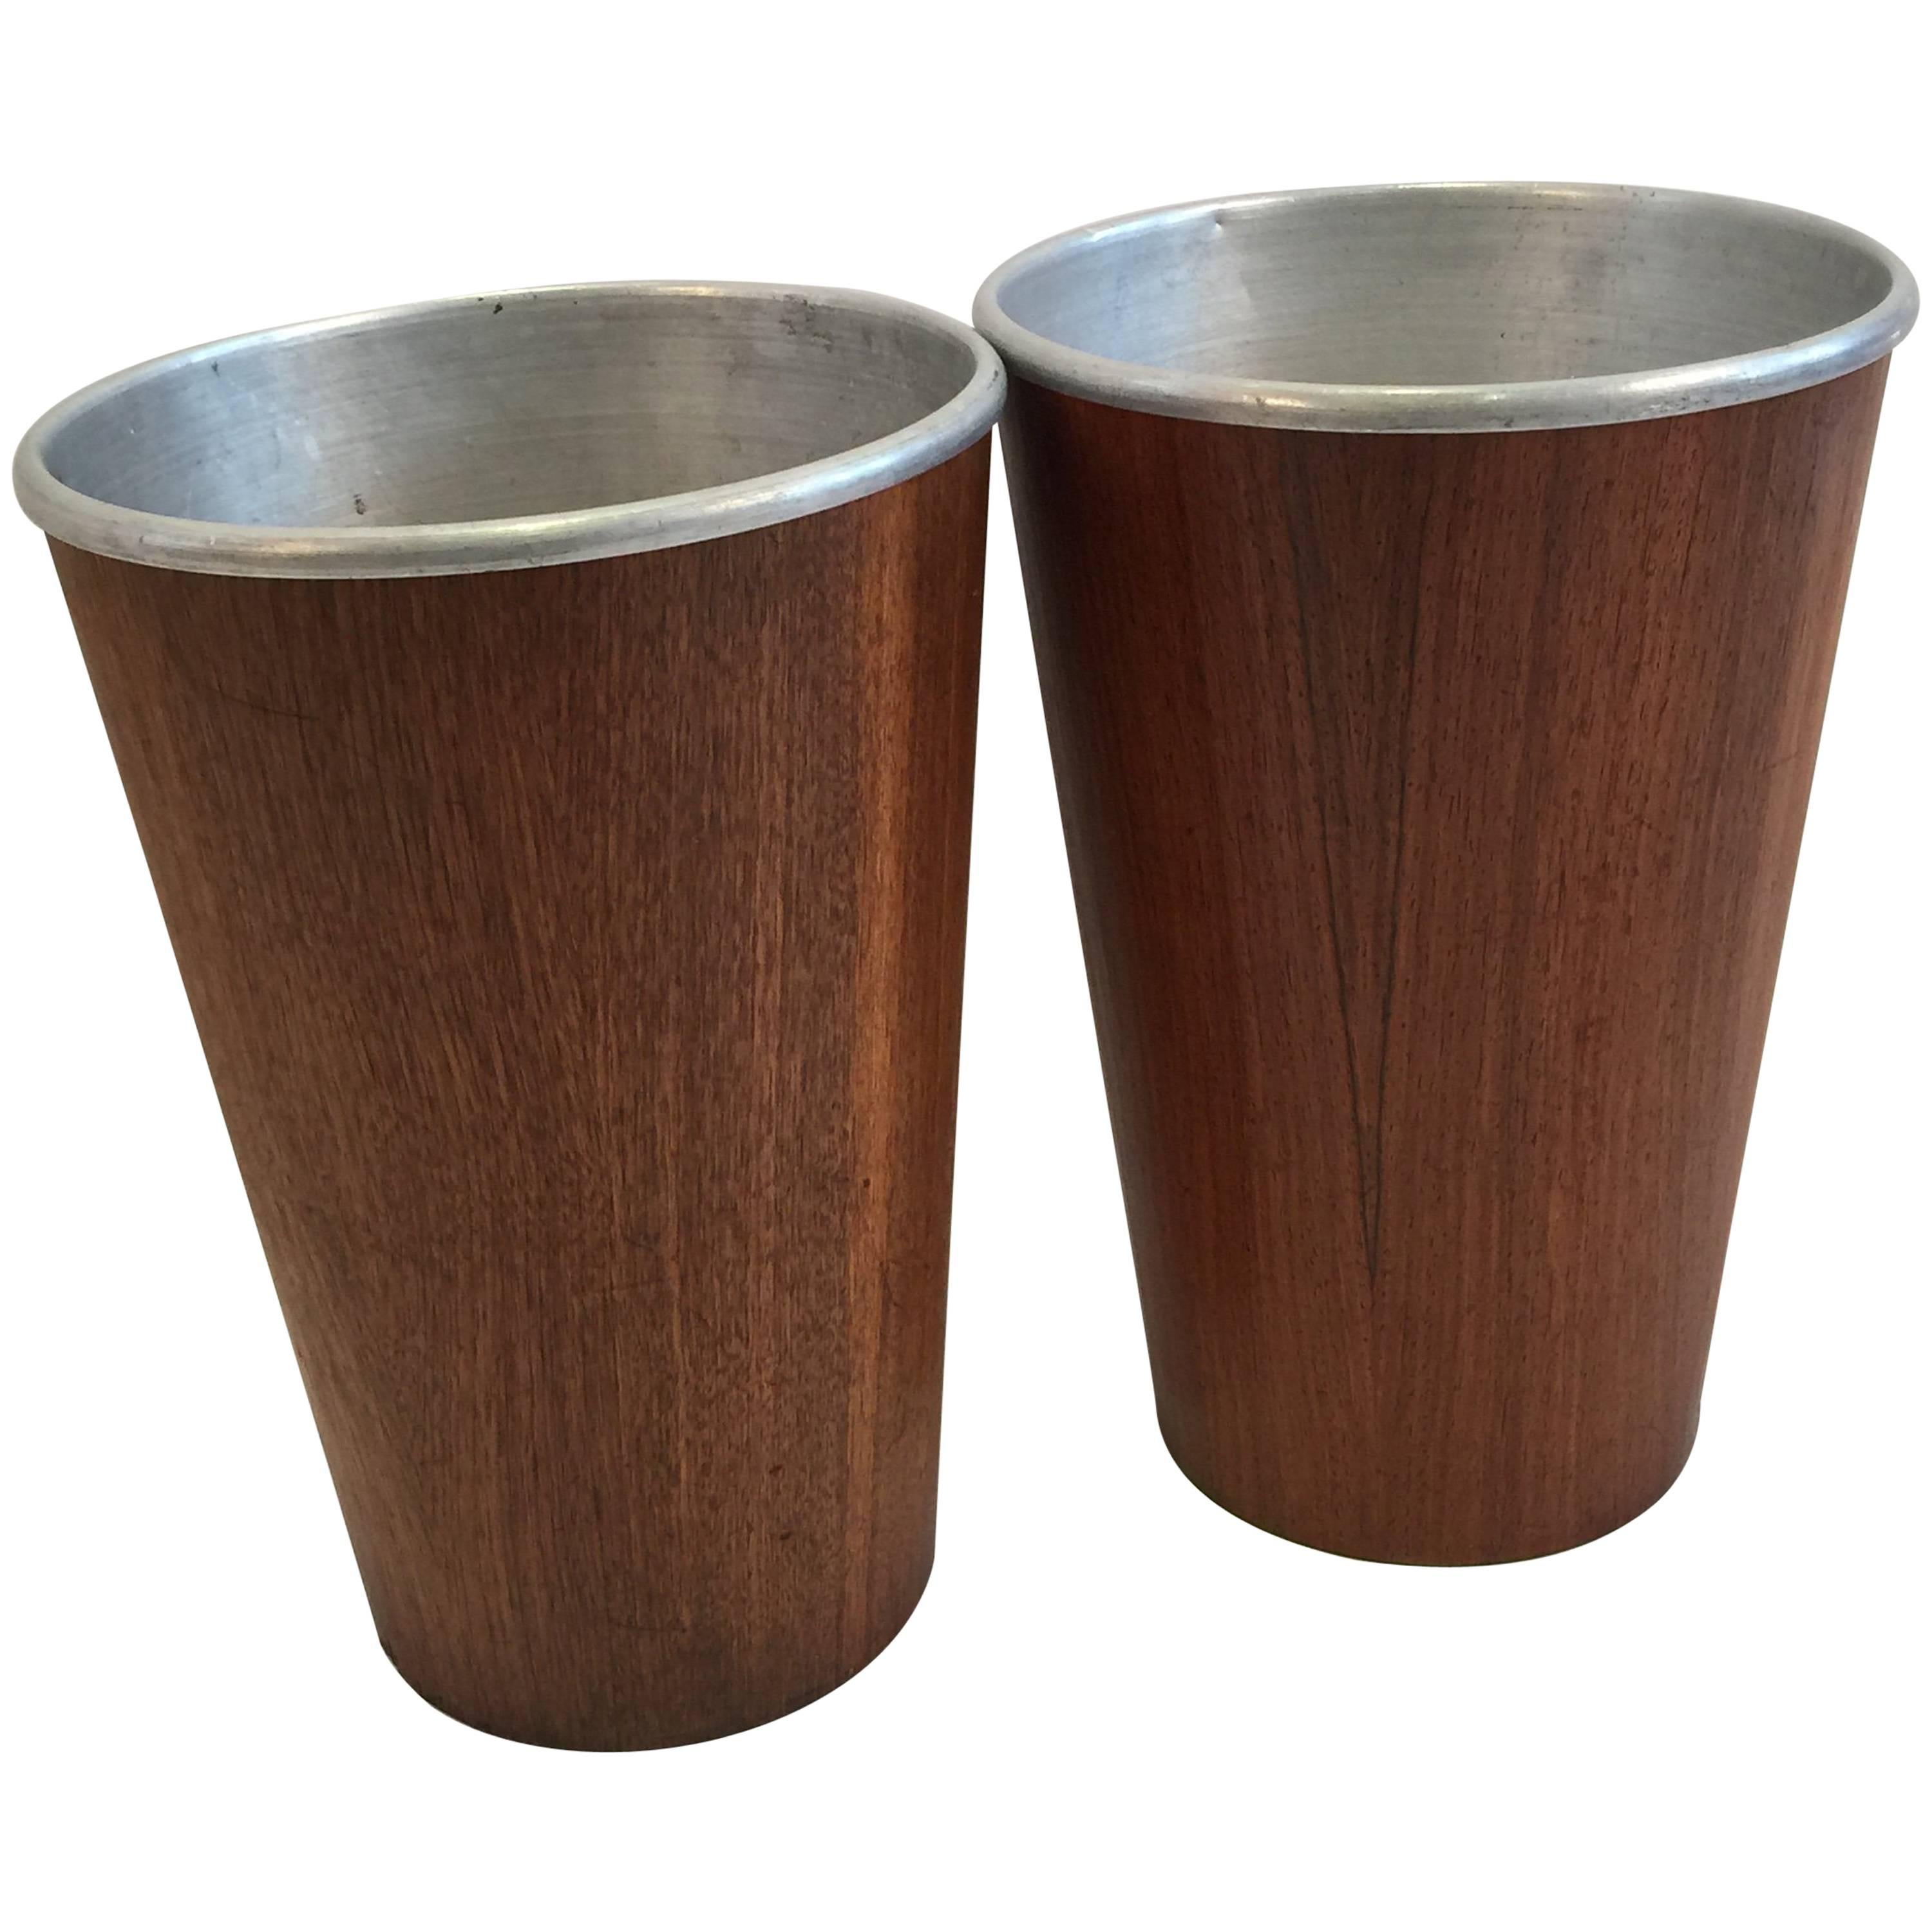 Pair of Wastebaskets with Metal Inserts by Martin Aberg for Servex